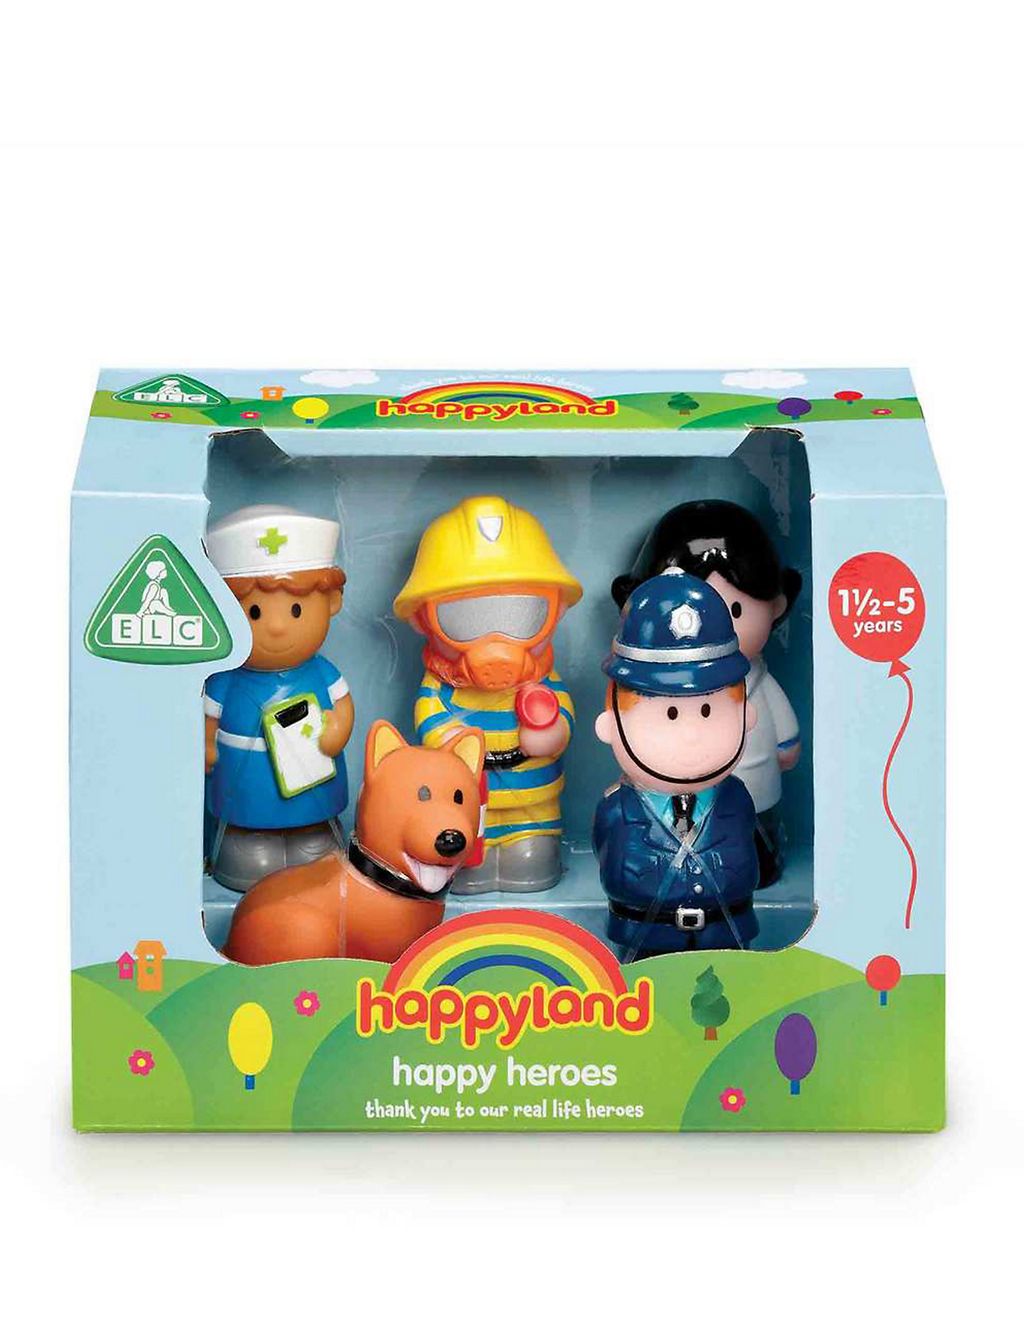 Happyland Happy Heroes (18 Mths-5 Yrs) 1 of 3